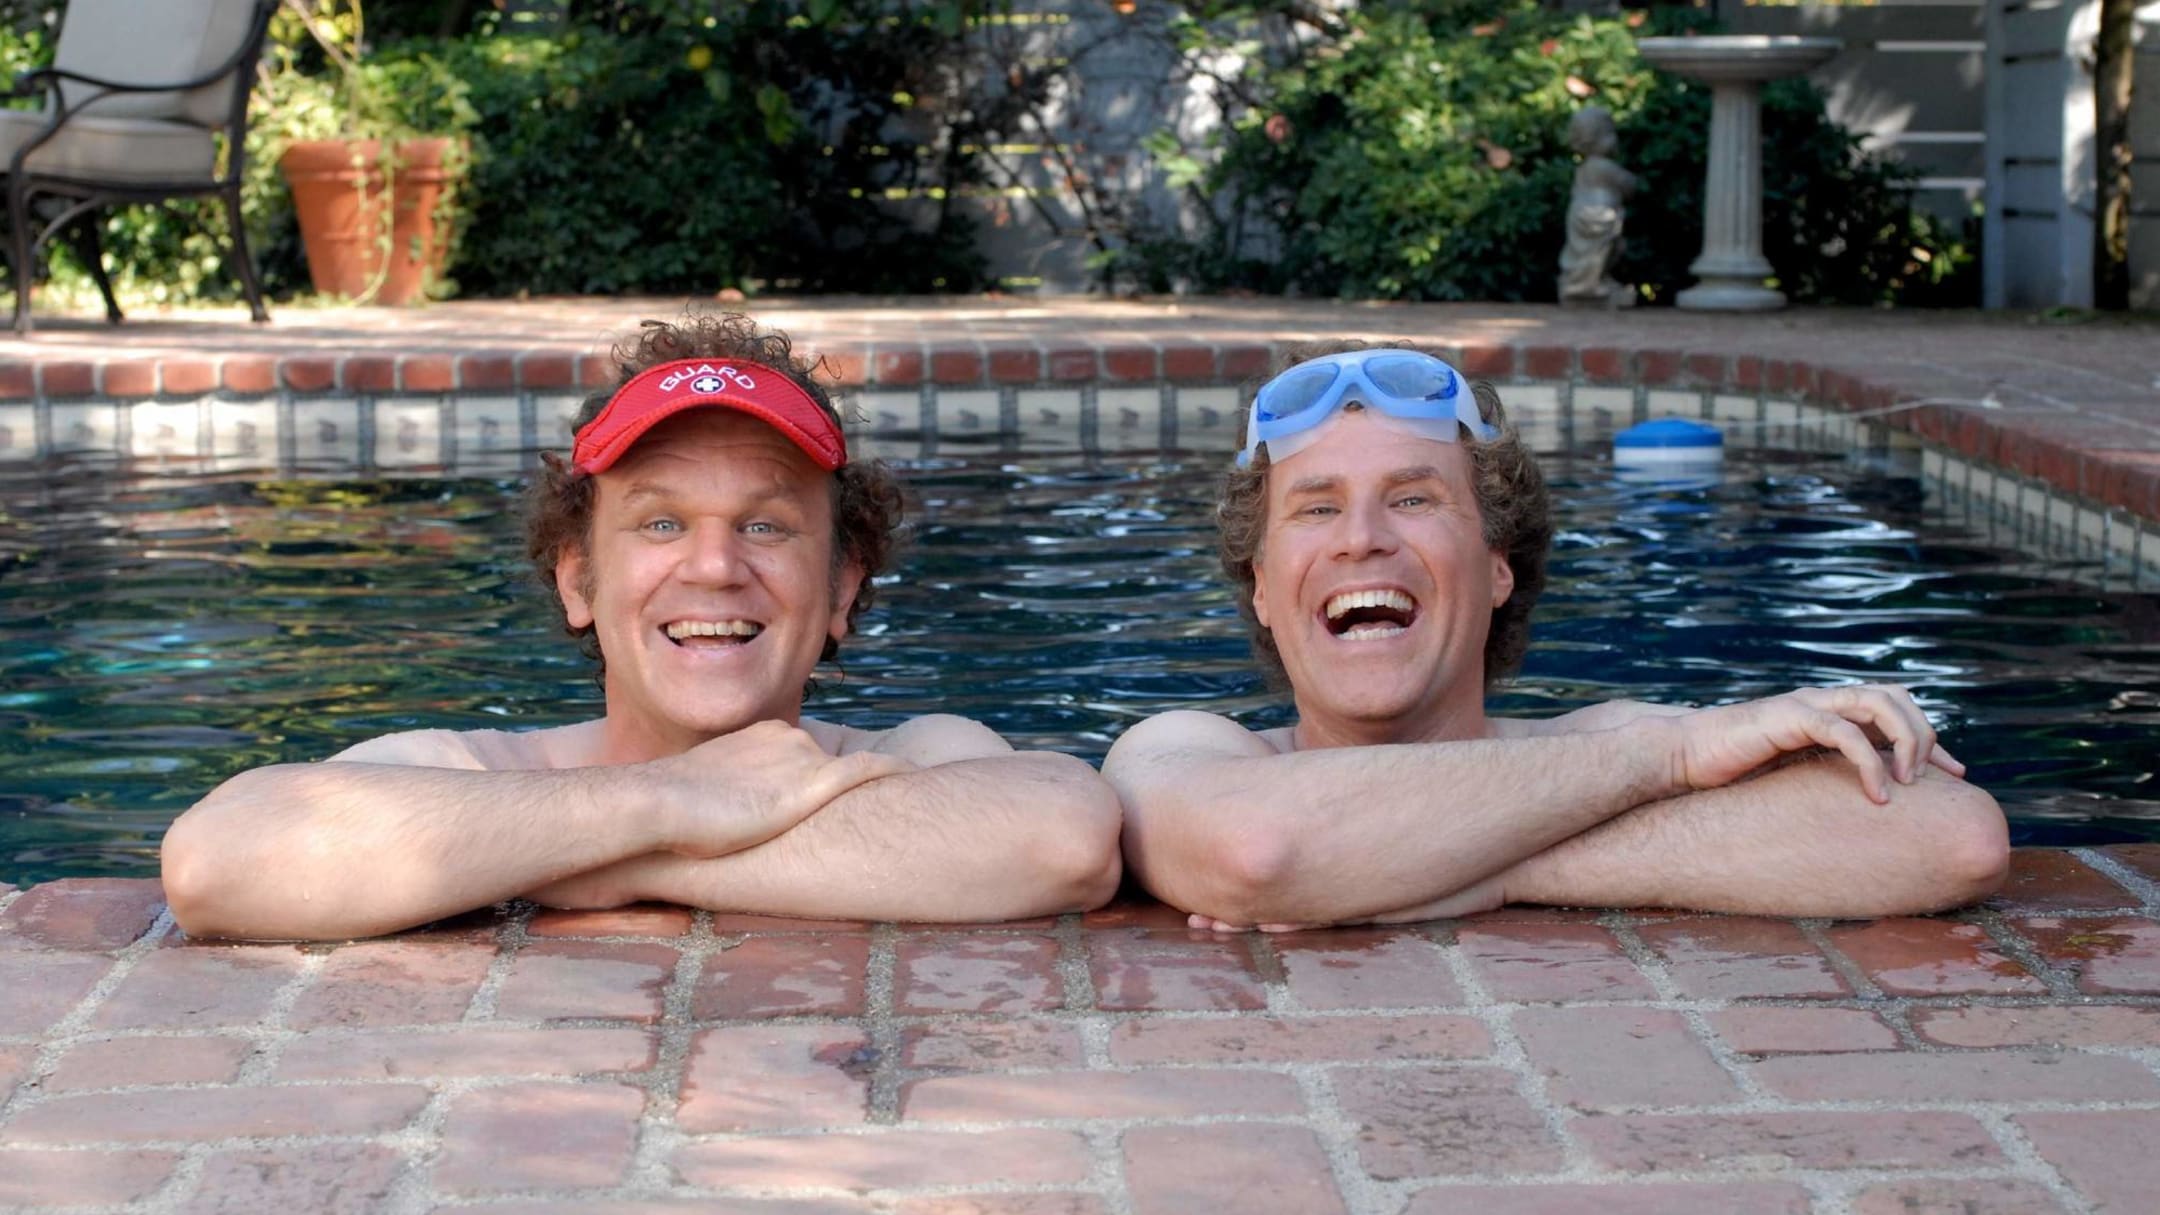 Adam McKay's 'Step Brothers' Offers Offensive Delights